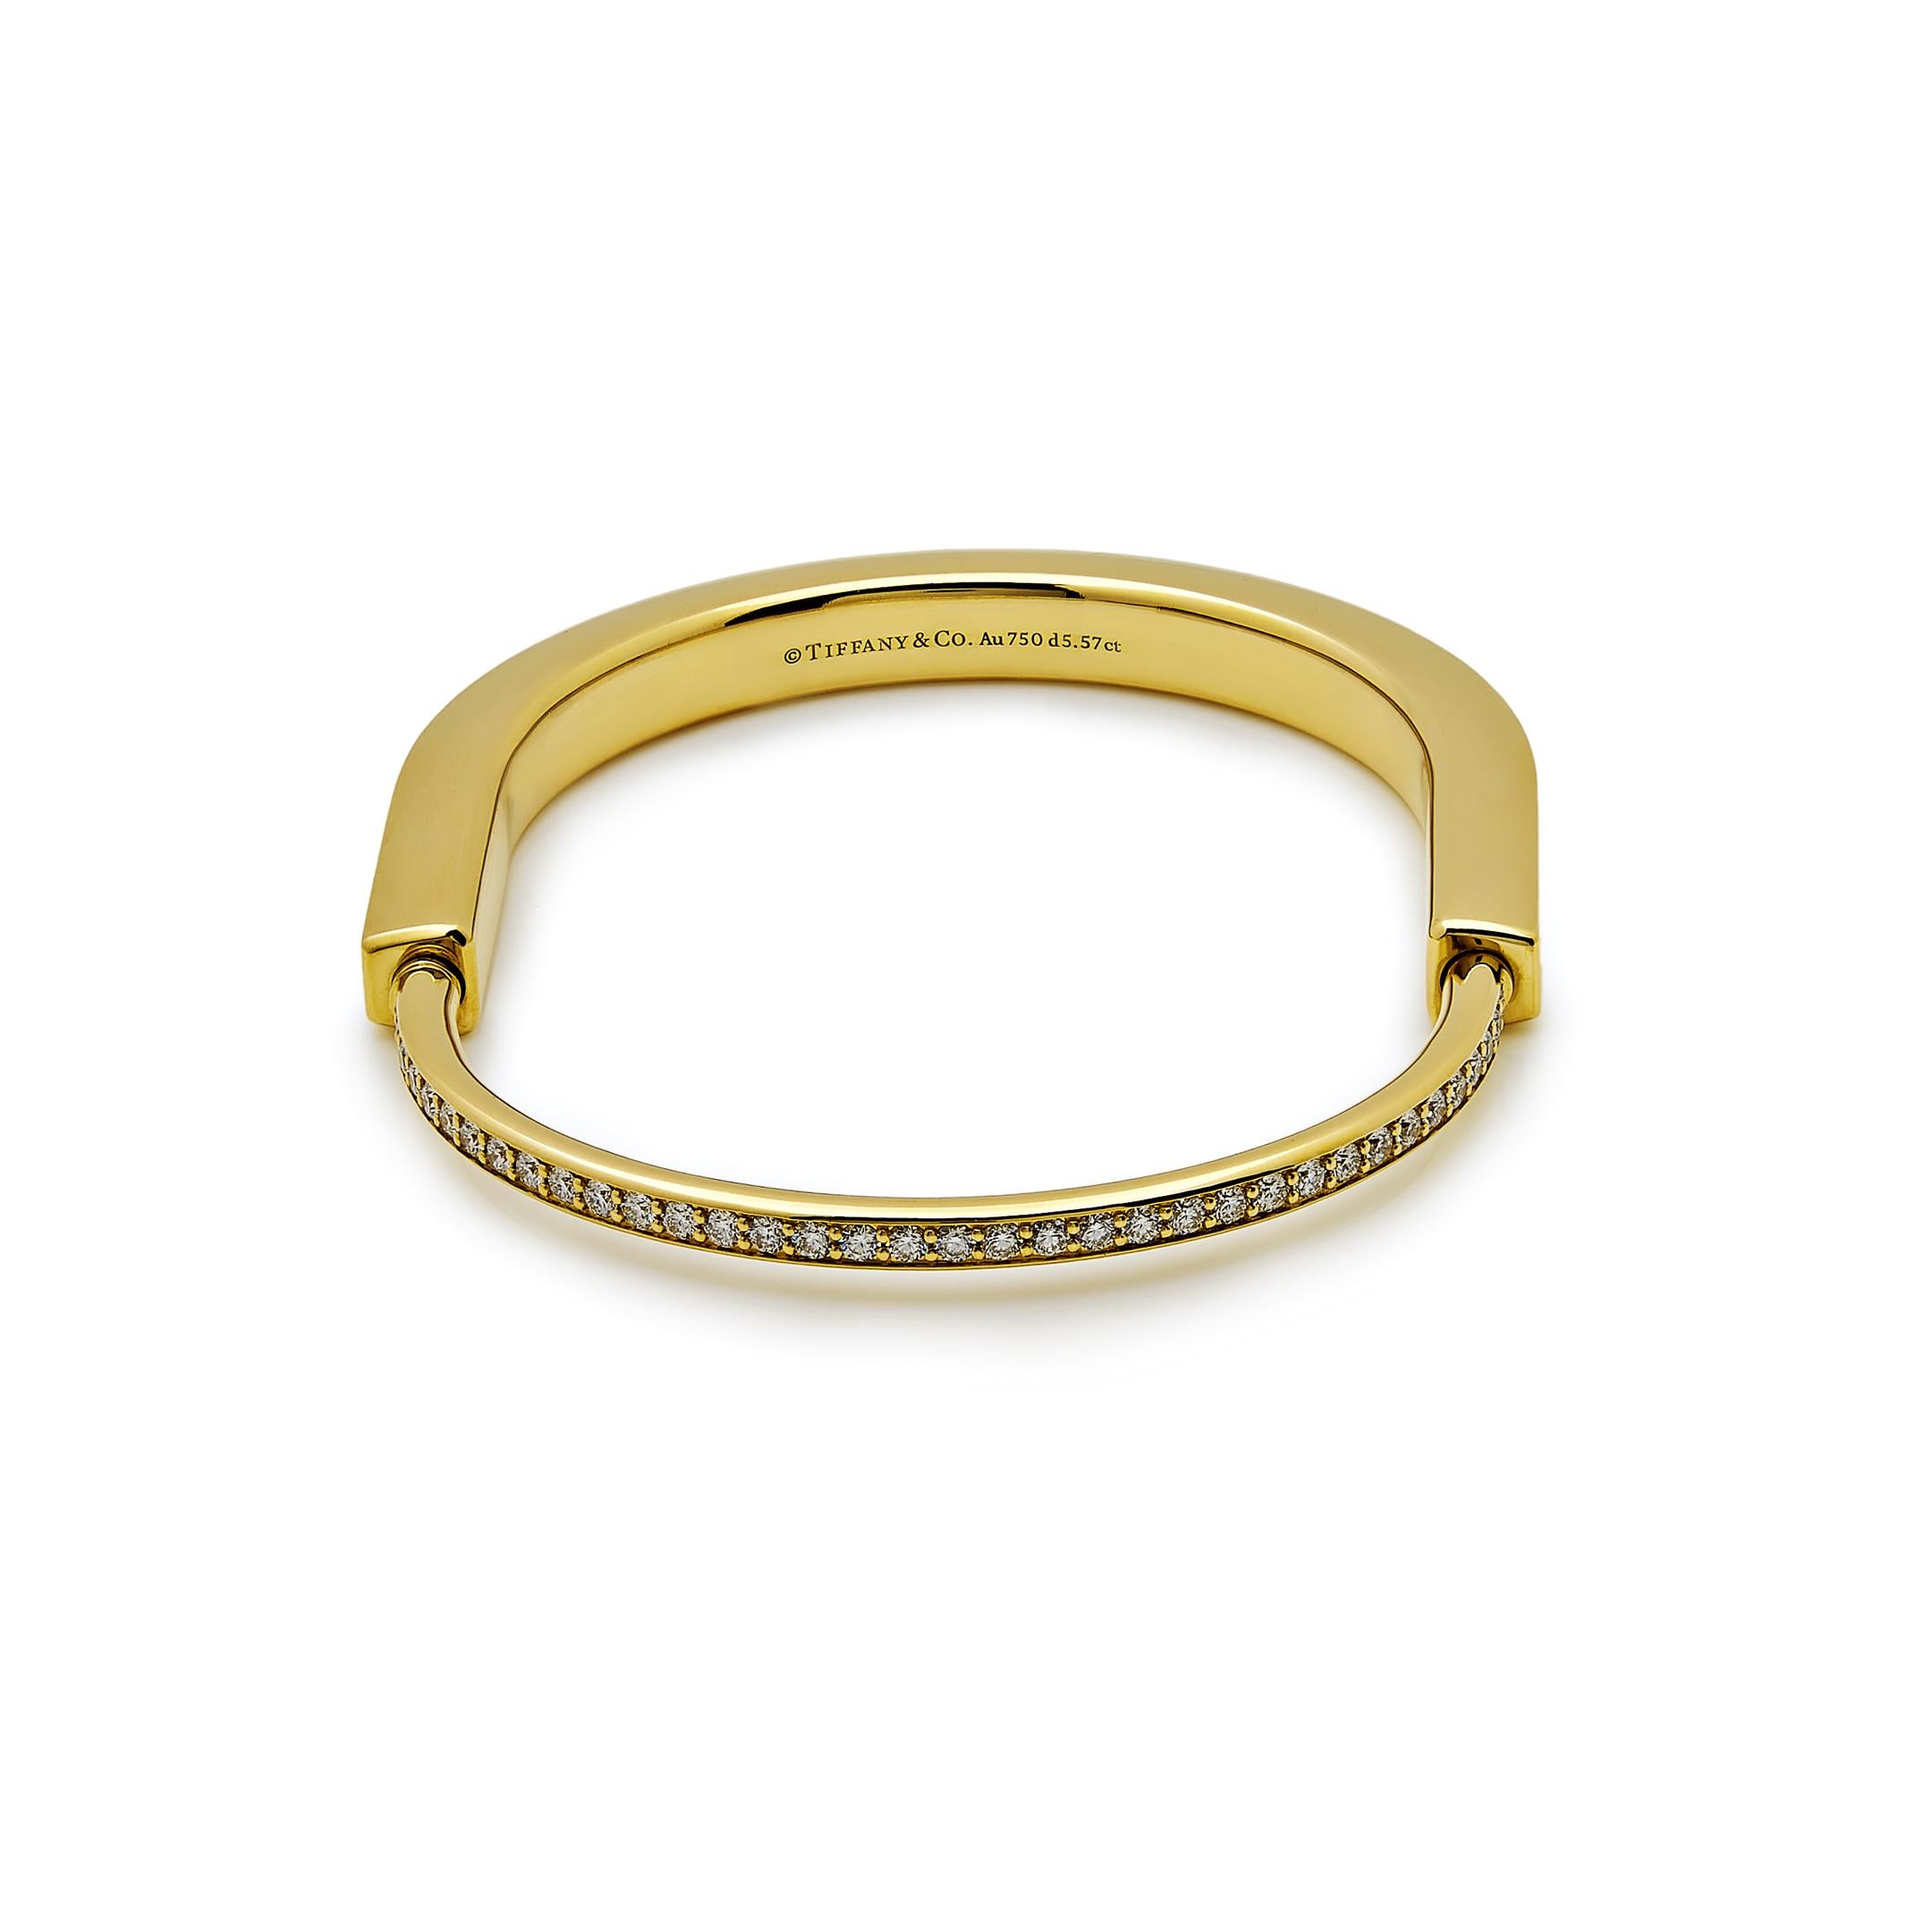 Women's or Men's Tiffany & Co. Lock Bangle in Yellow Gold with Full Pavé Diamonds 70158264 For Sale